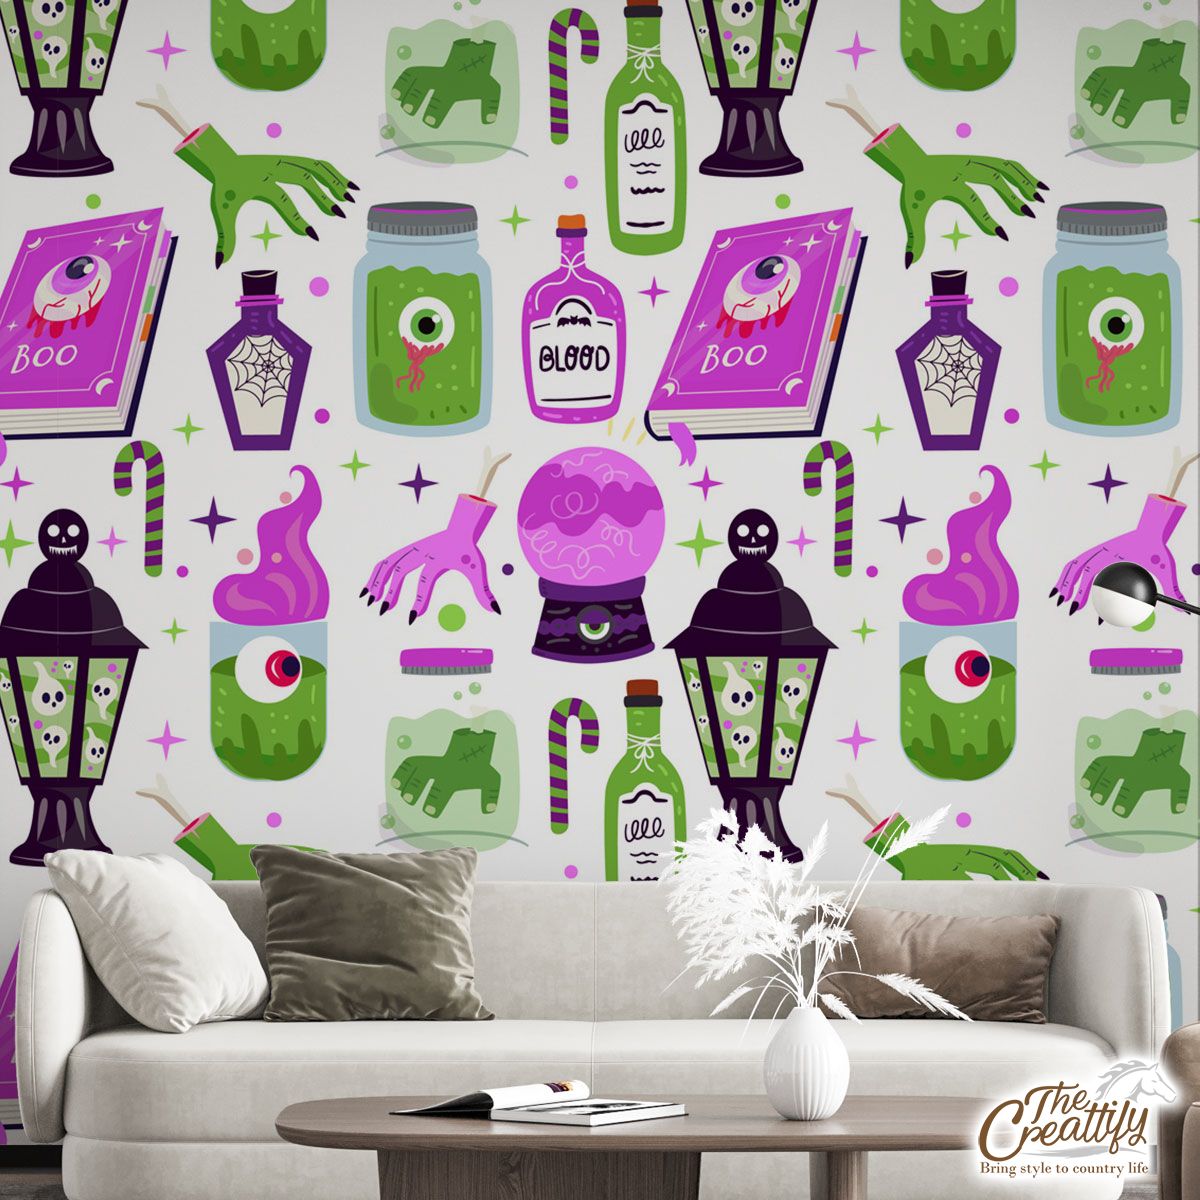 Witch Potions, Creepy Hand, Blood, Wicked Witches Light Halloween Wall Mural